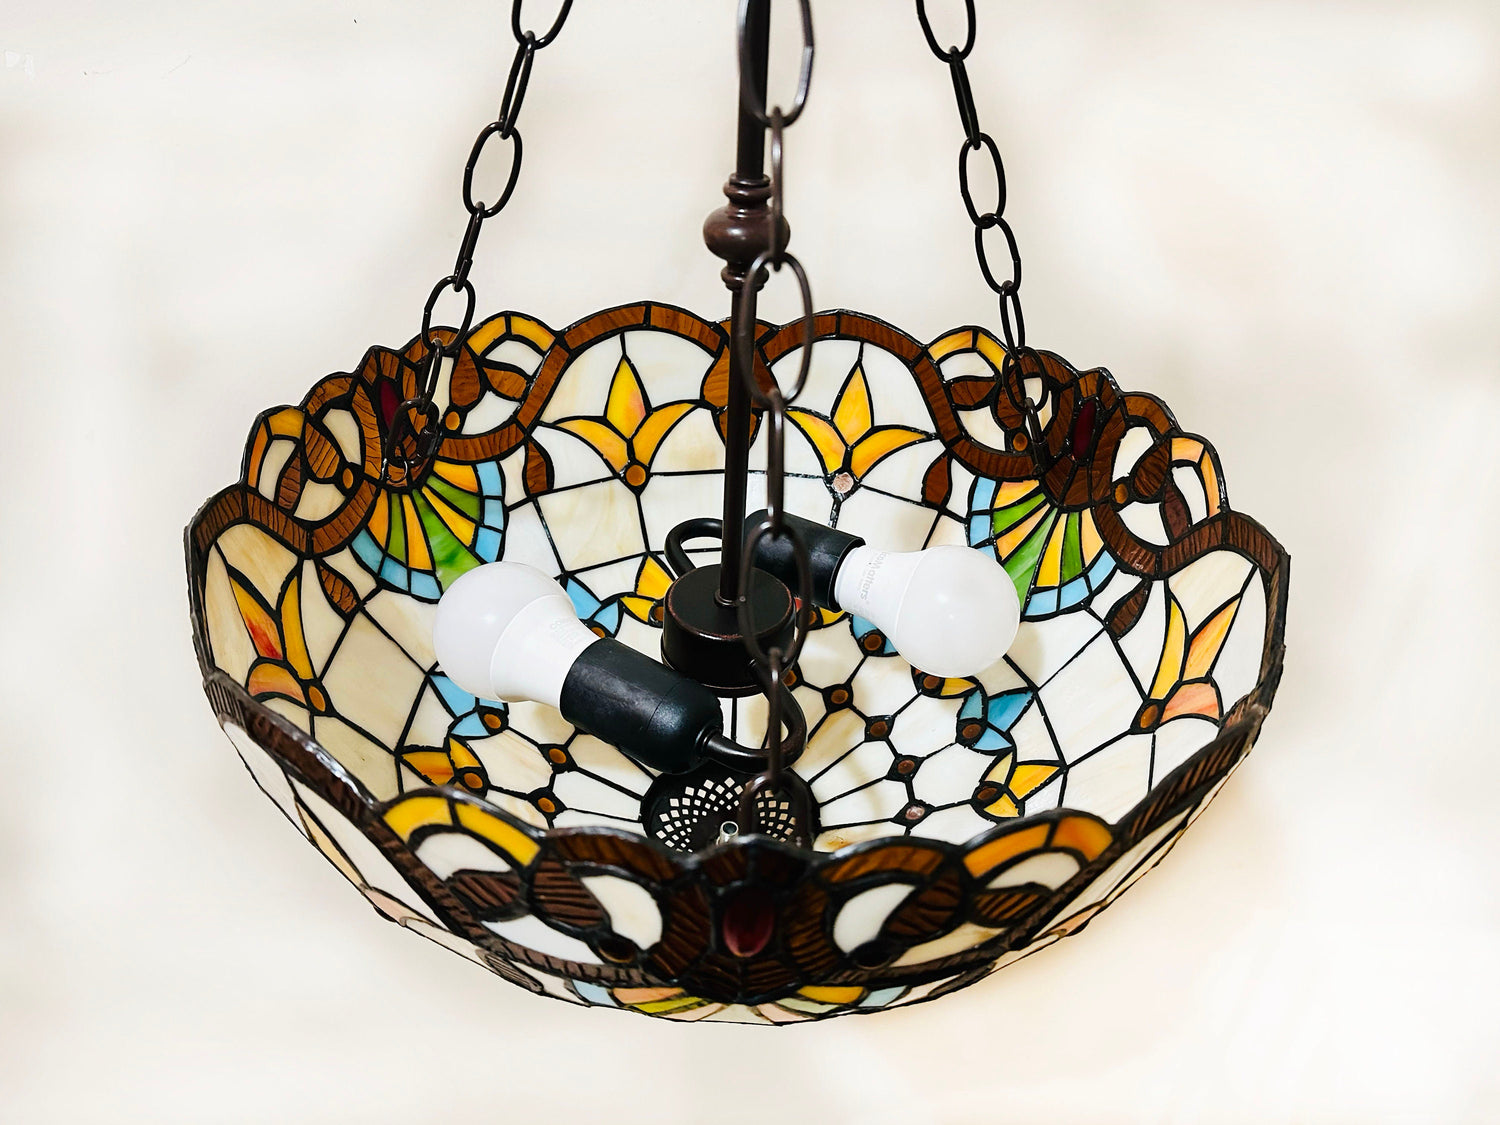 Crown Tiffany Inverted Lamp 16in, Leadglass Stained Glass Shade, Crystal Bead Lampshade, Chandelier, Pendant Light, Living Room Kitchen Lamp